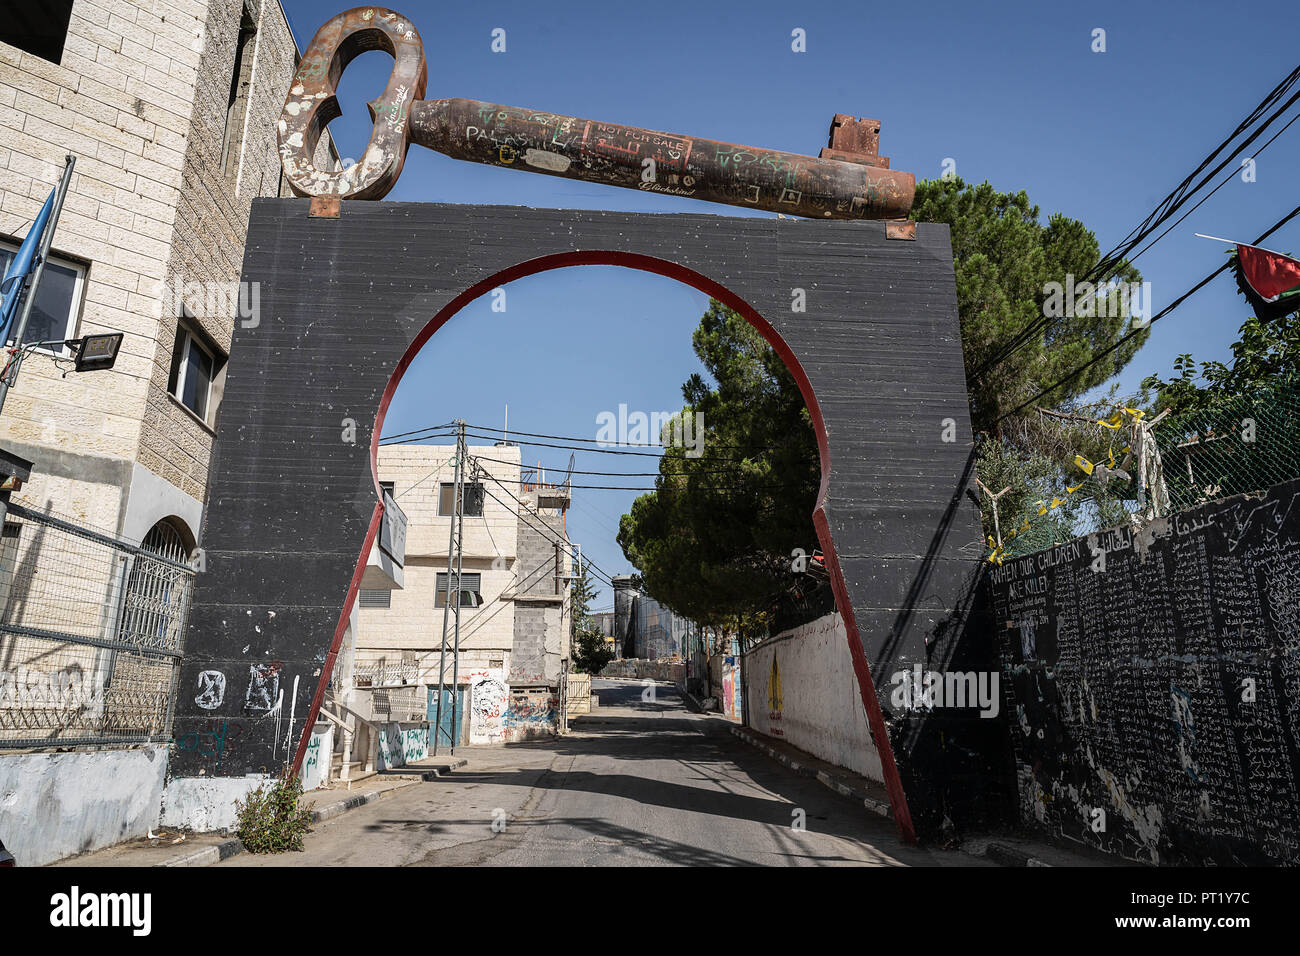 Bethlehem, Palestine. 10th Feb, 2018. The entrance to Aida refugee camp seen with a key that represents their freedom in the hope that one day they will have their land back and be able to return to their homes during the summer camp.The Return Summer Camp was organised for children of the Aida refugee camp, it was established in 1950 by the Palestinians who were expelled from their homes from 27 towns throughout Palestine, namely Nasra, Tabaria, Jerusalem, Acre, Jaffa, Haifa and Hebron. This is a 4th generation of refugees, 130 children ranging from 4 to 16 years of age being overlooked Stock Photo